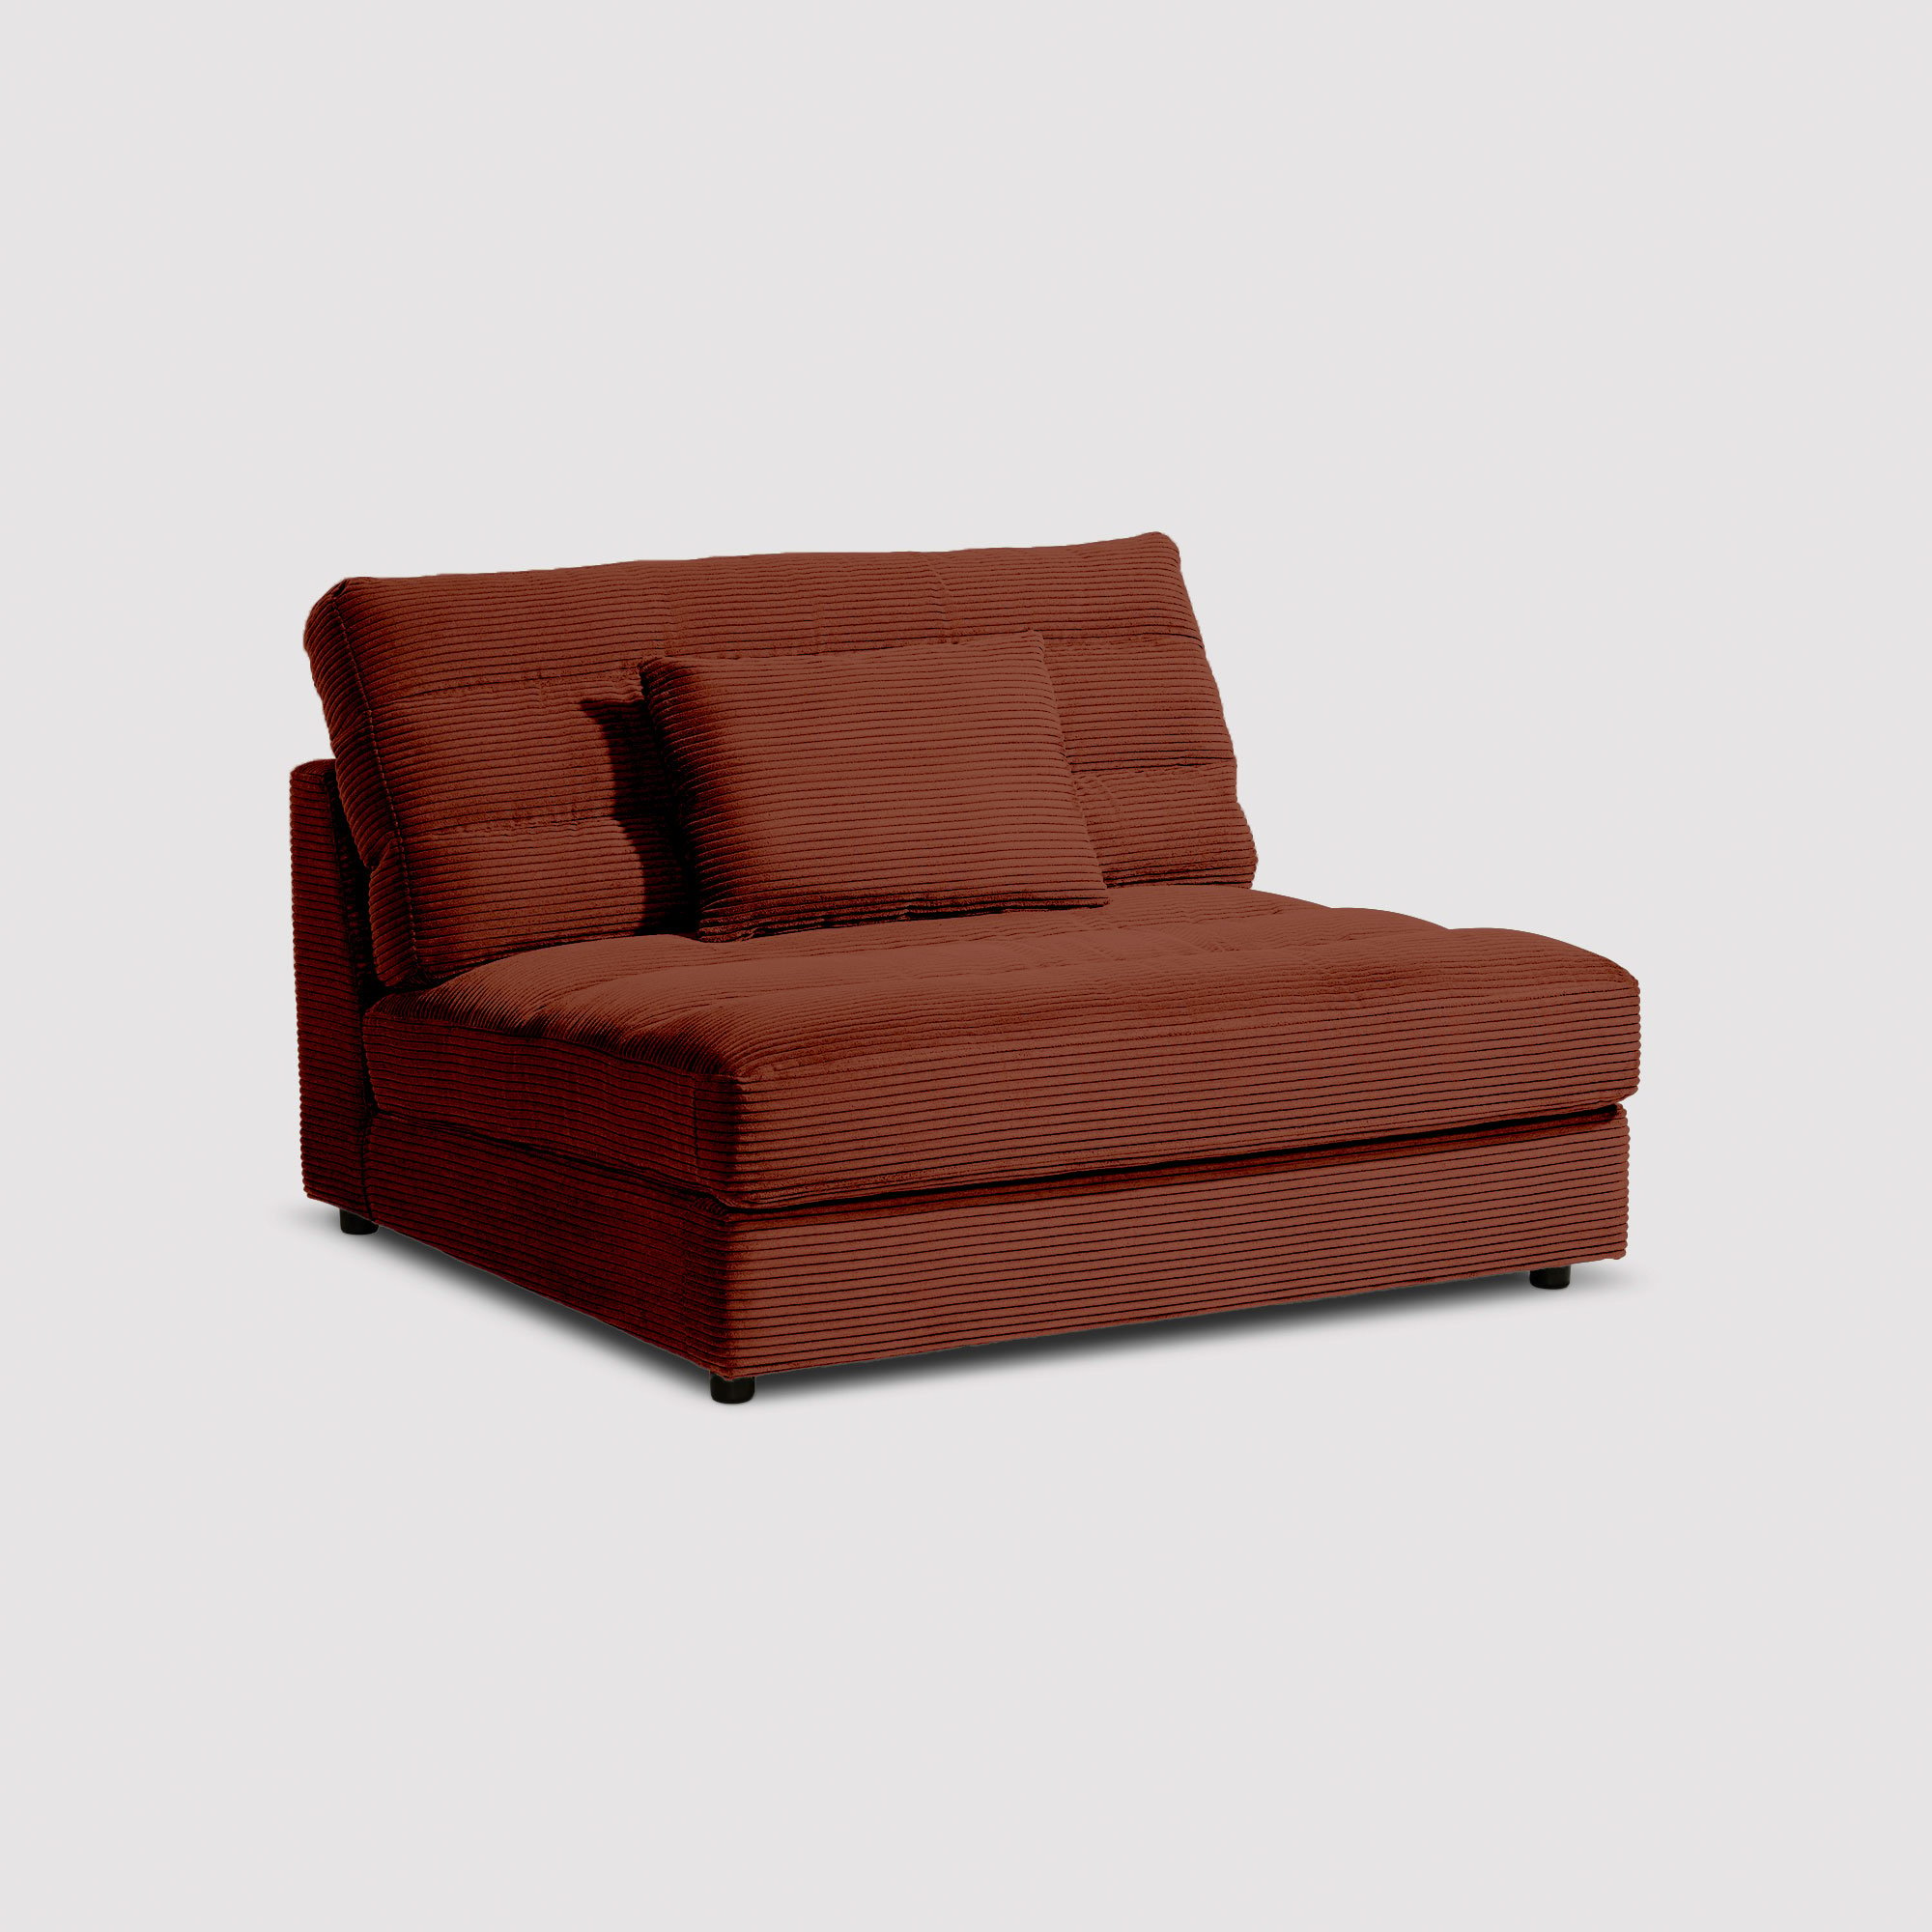 Twain 1.5 Seater Without Armrests, Red Fabric | Barker & Stonehouse